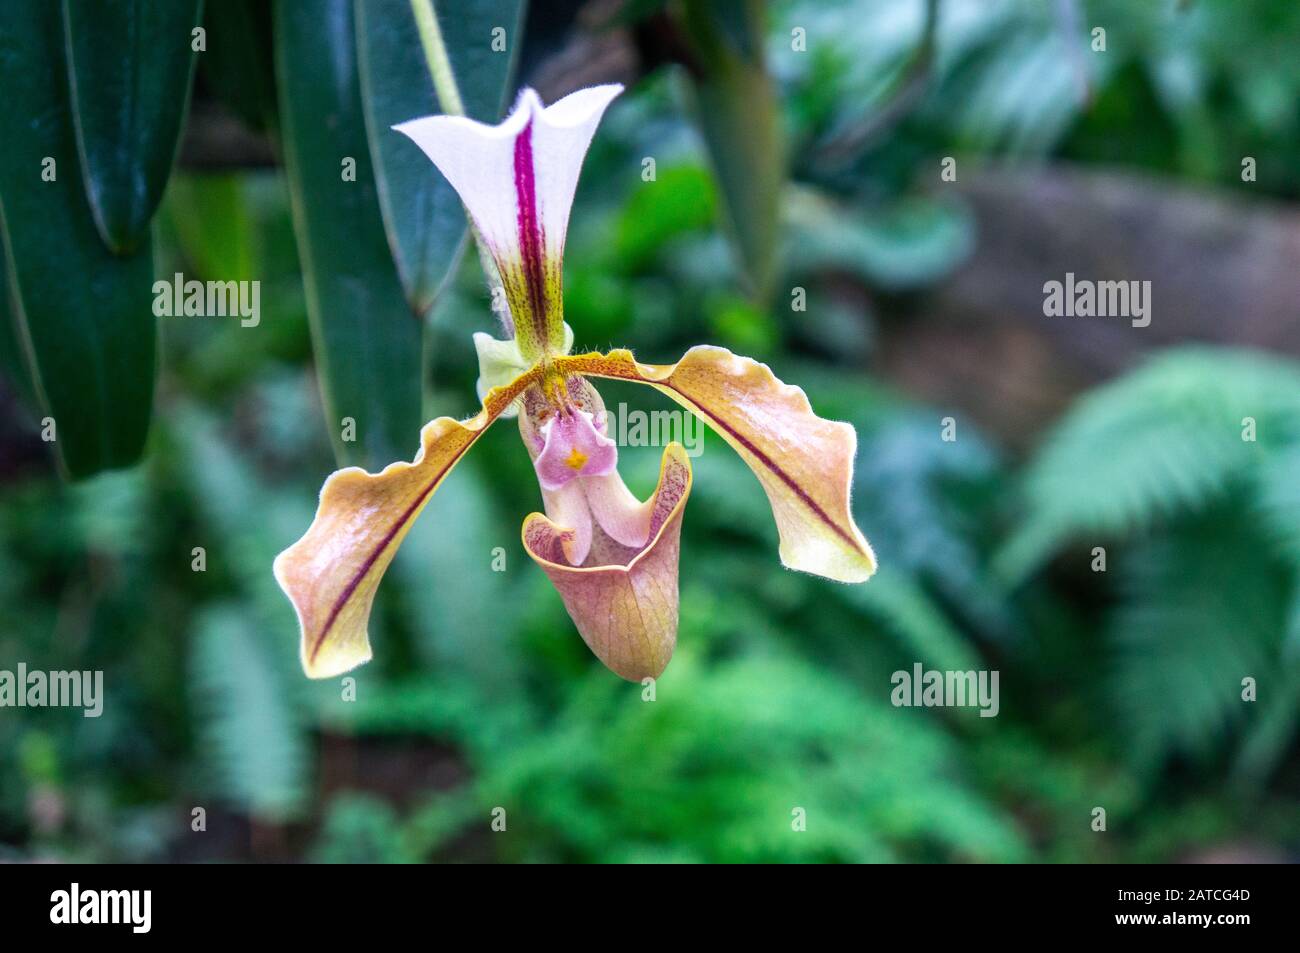 Macro photo of single Venus slipper yellow and pink orchid with a cool toned jungle background. Shot in daylight at a botanical gardens Stock Photo